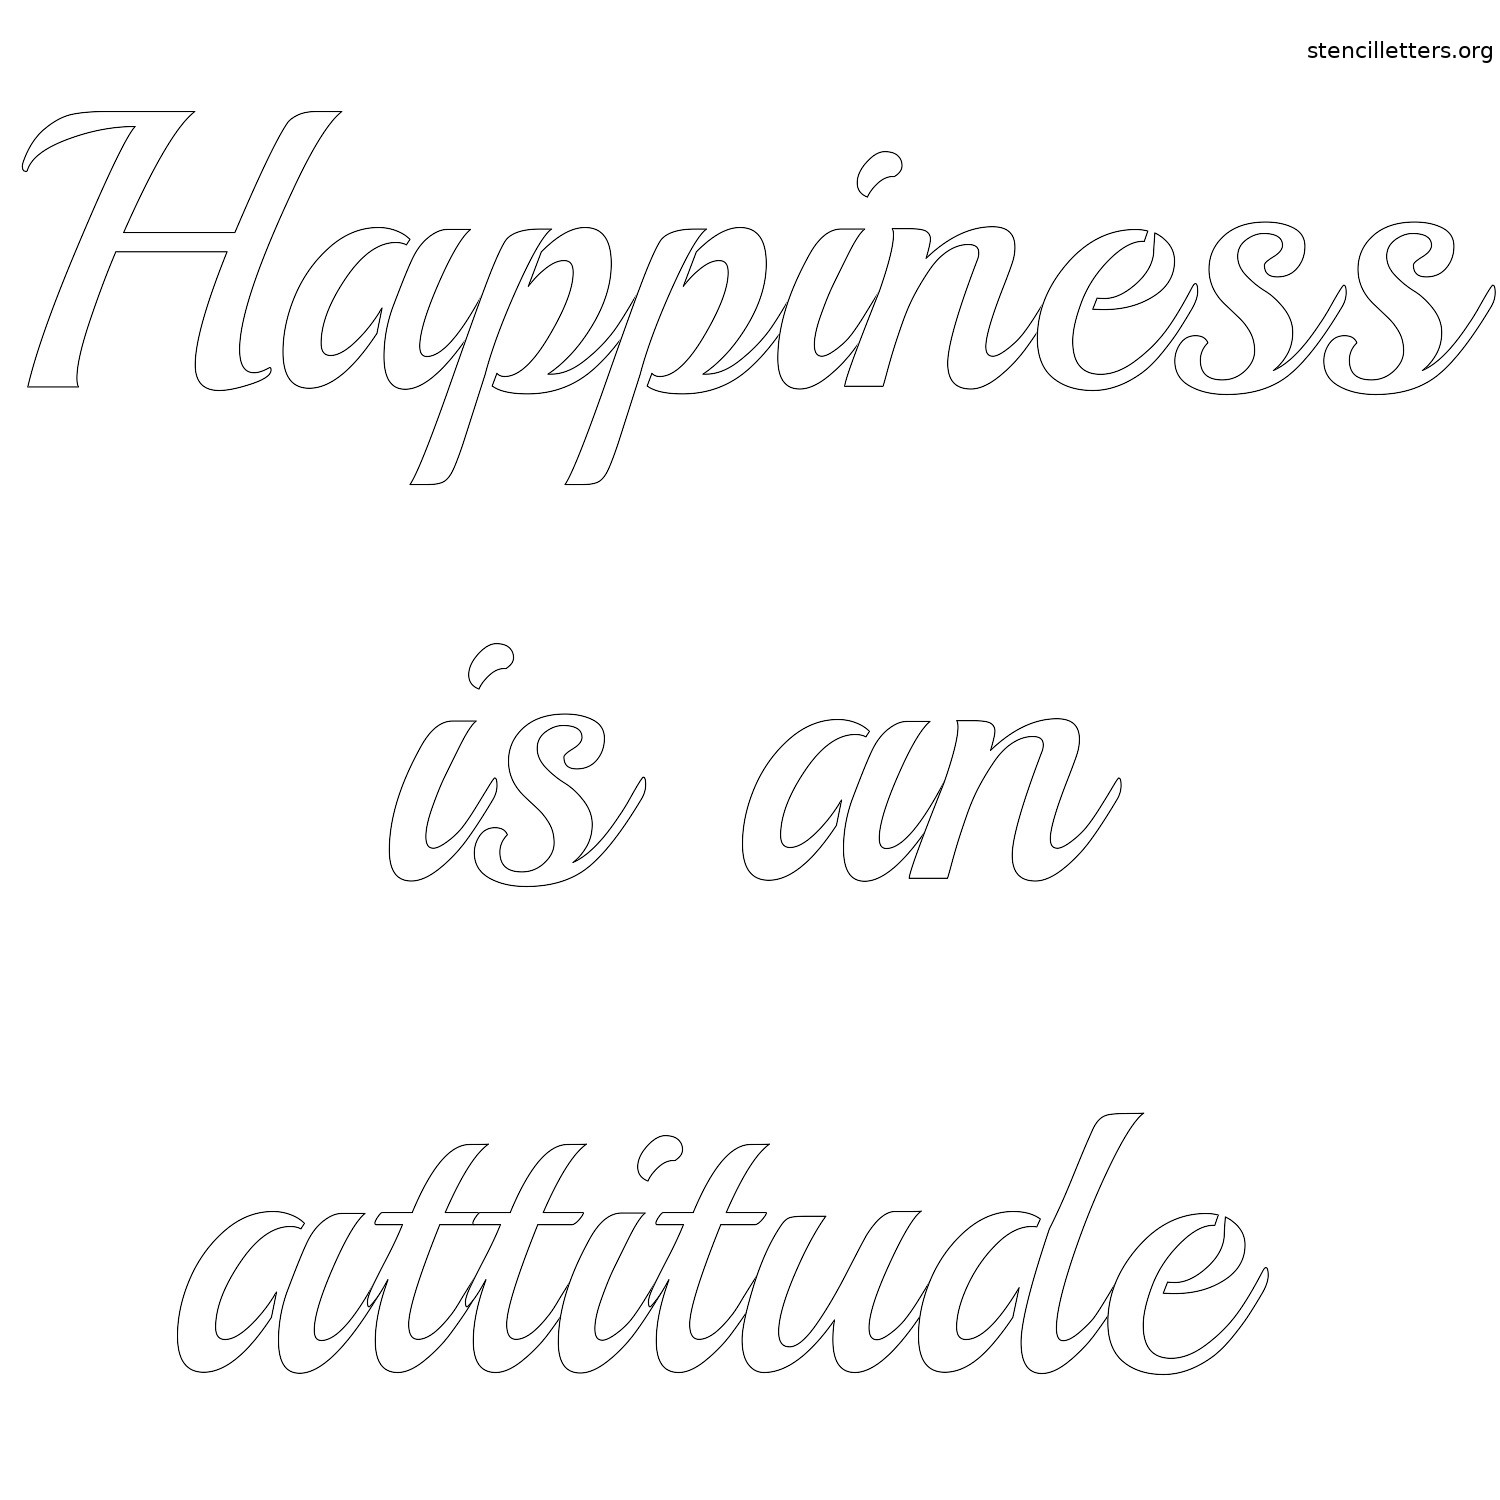 happiness-is-an-attitude-quote-stencil-outline.jpg